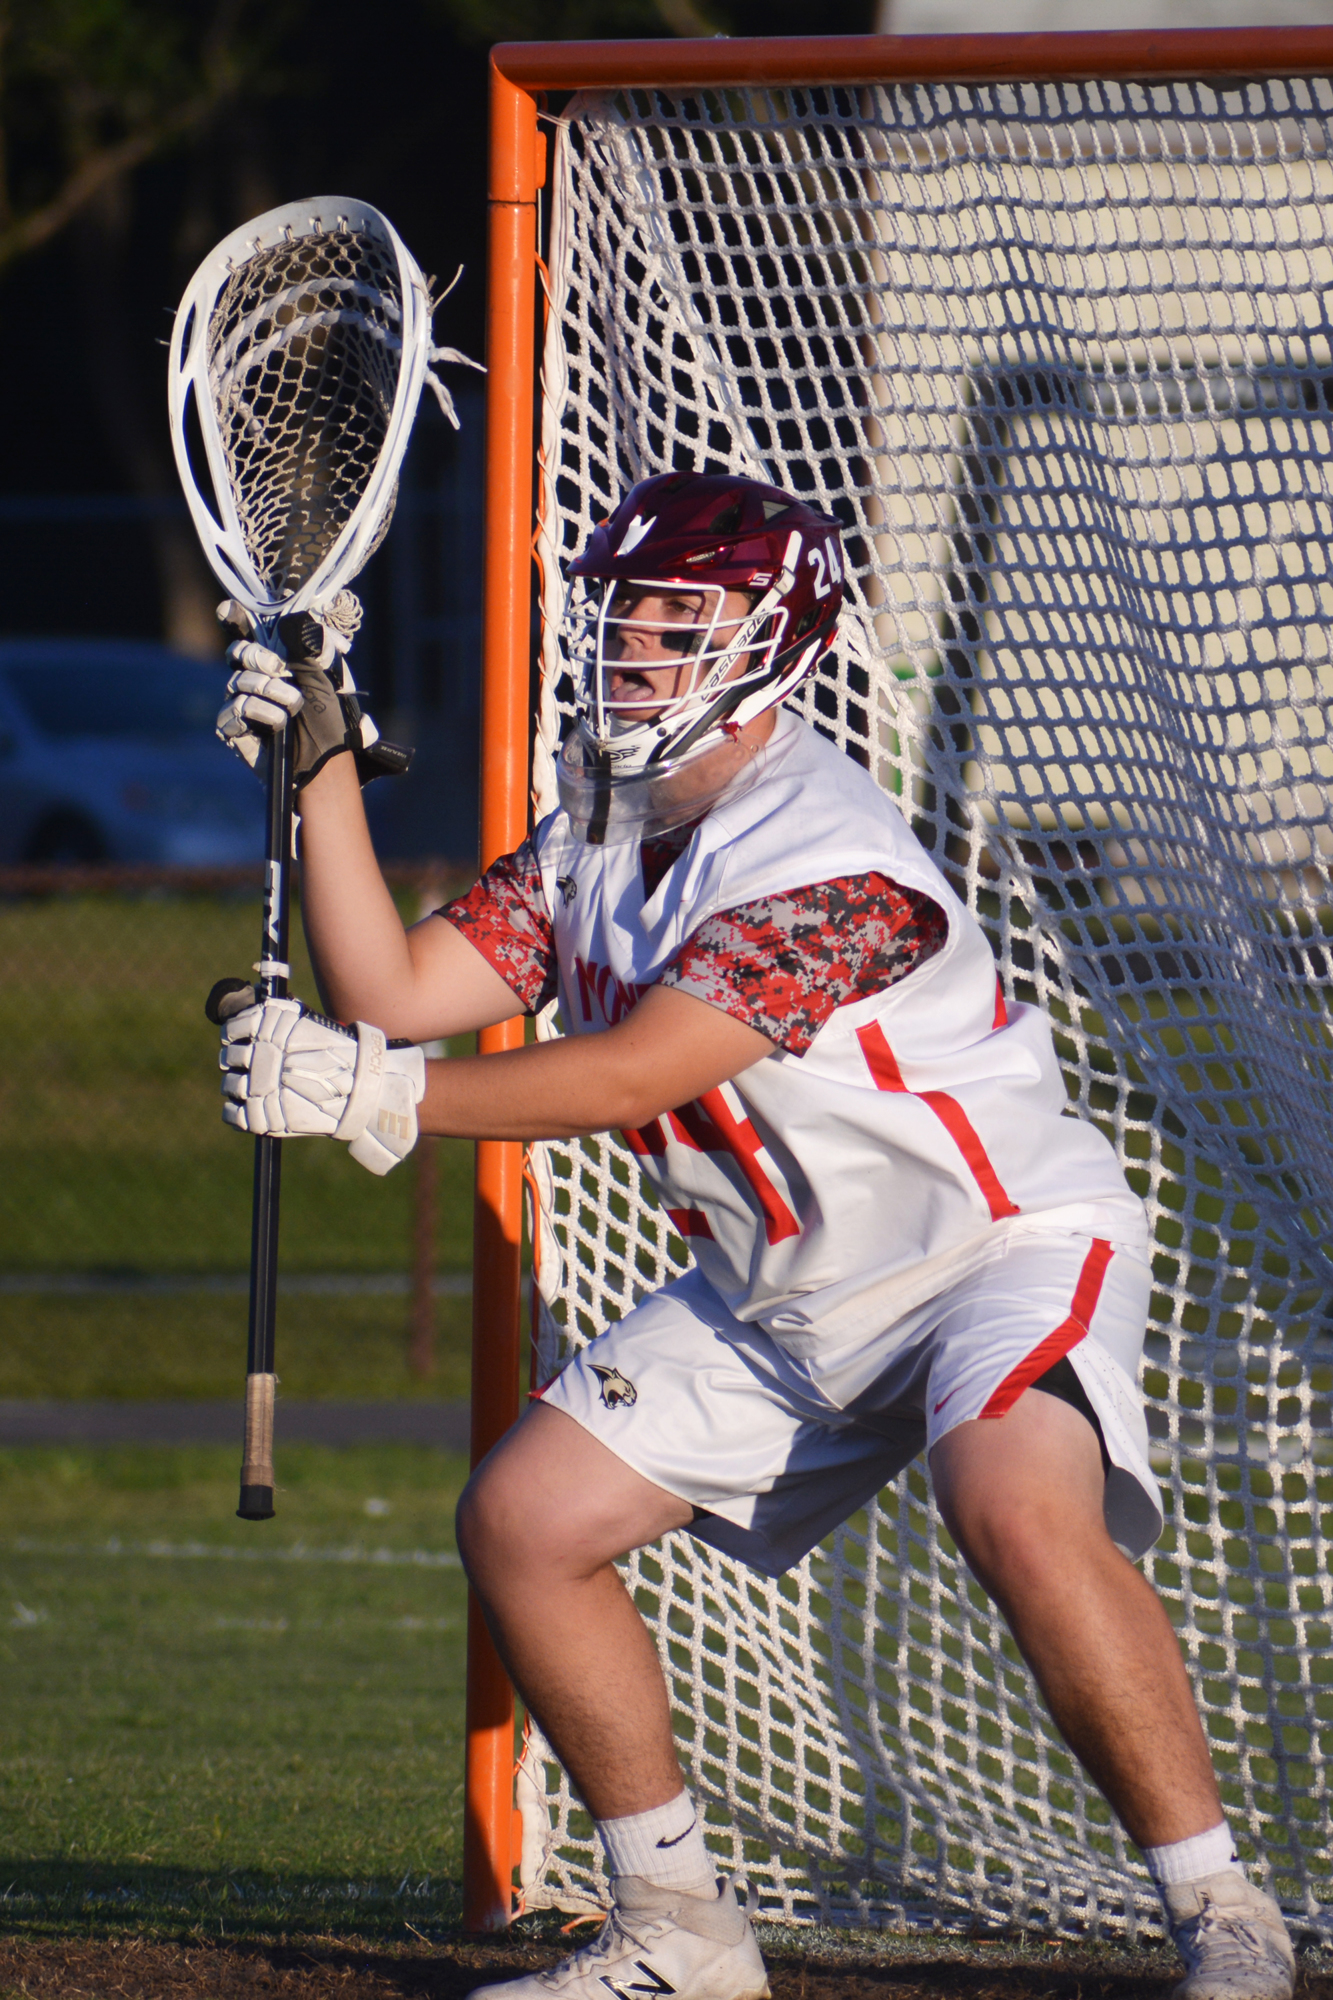 Nick Petrucelli is a senior leader in goal for the Cougars.